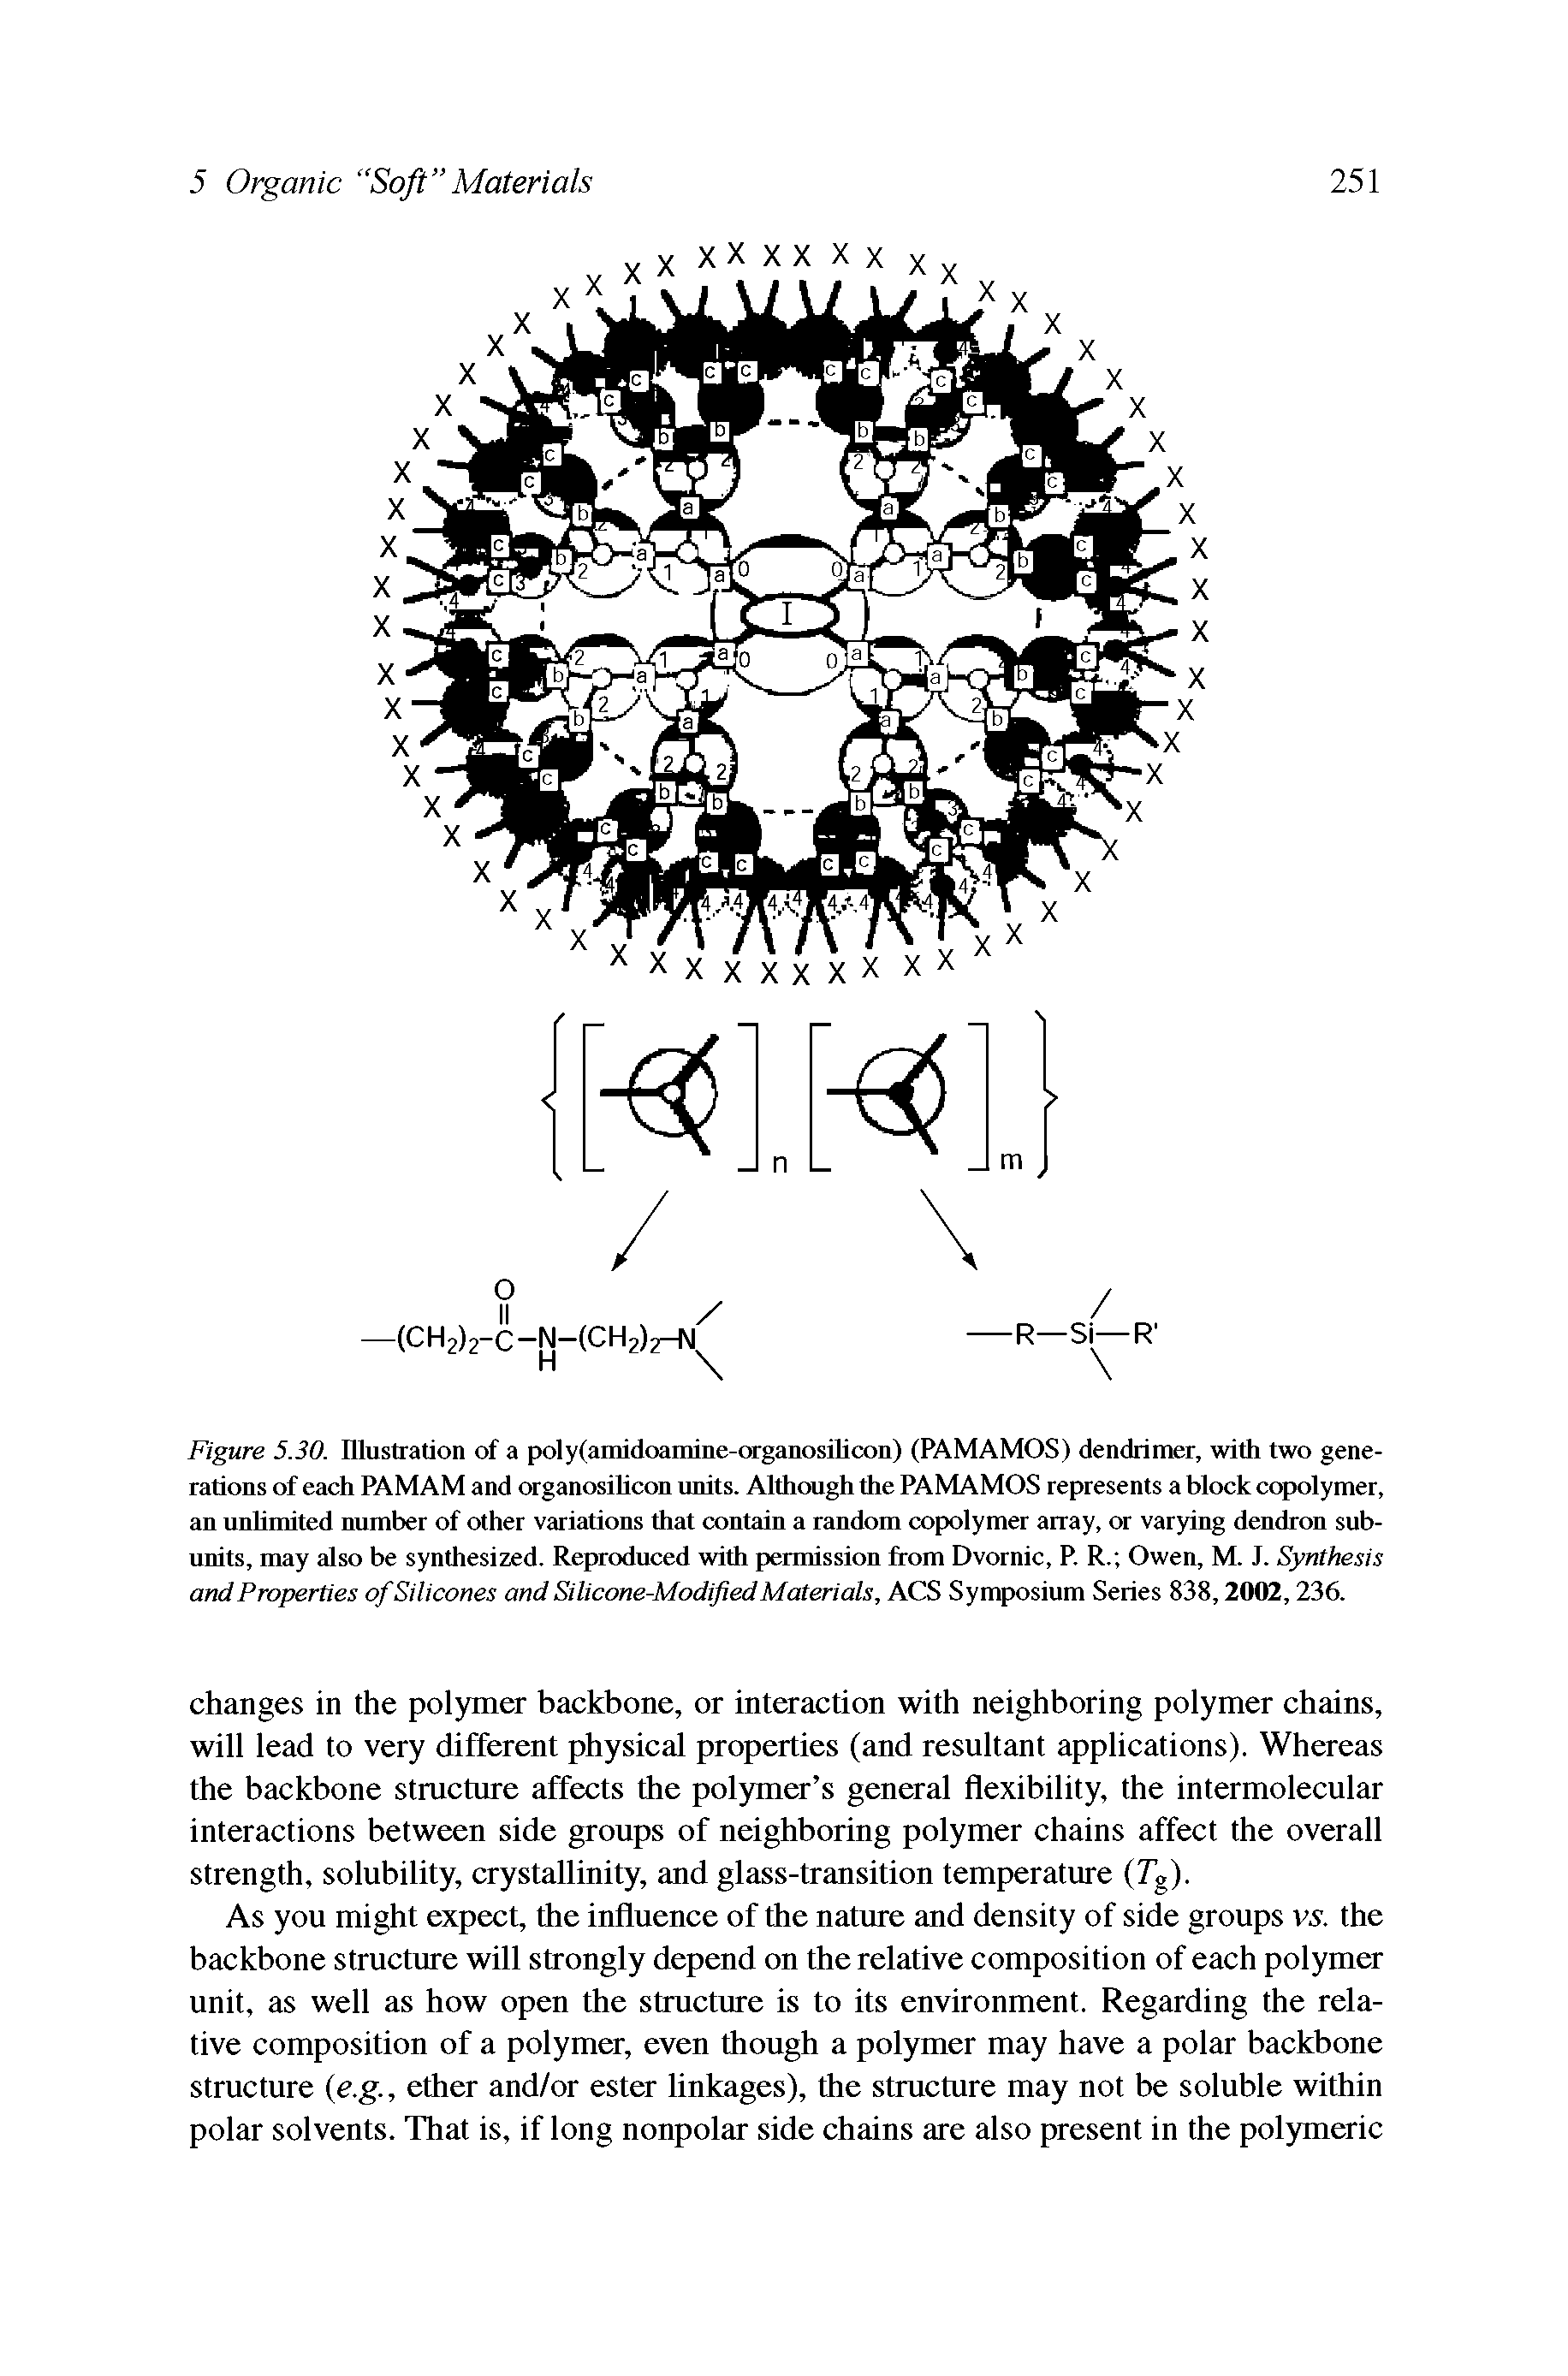 Figure 5.30. Illustration of a poly(amidoamine-organosilicon) (PAMAMOS) dendrimer, with two generations of each PAMAM and organosihcon units. Although the PAMAMOS represents a block copolymer, an unhmited number of other variations that contain a random copolymer array, or varying dendron subunits, may also be synthesized. Reproduced with permission from Dvornic, P. R. Owen, M. J. Synthesis and Properties of Silicones and Silicone-Modified Materials, ACS Symposium Series 838,2002,236.